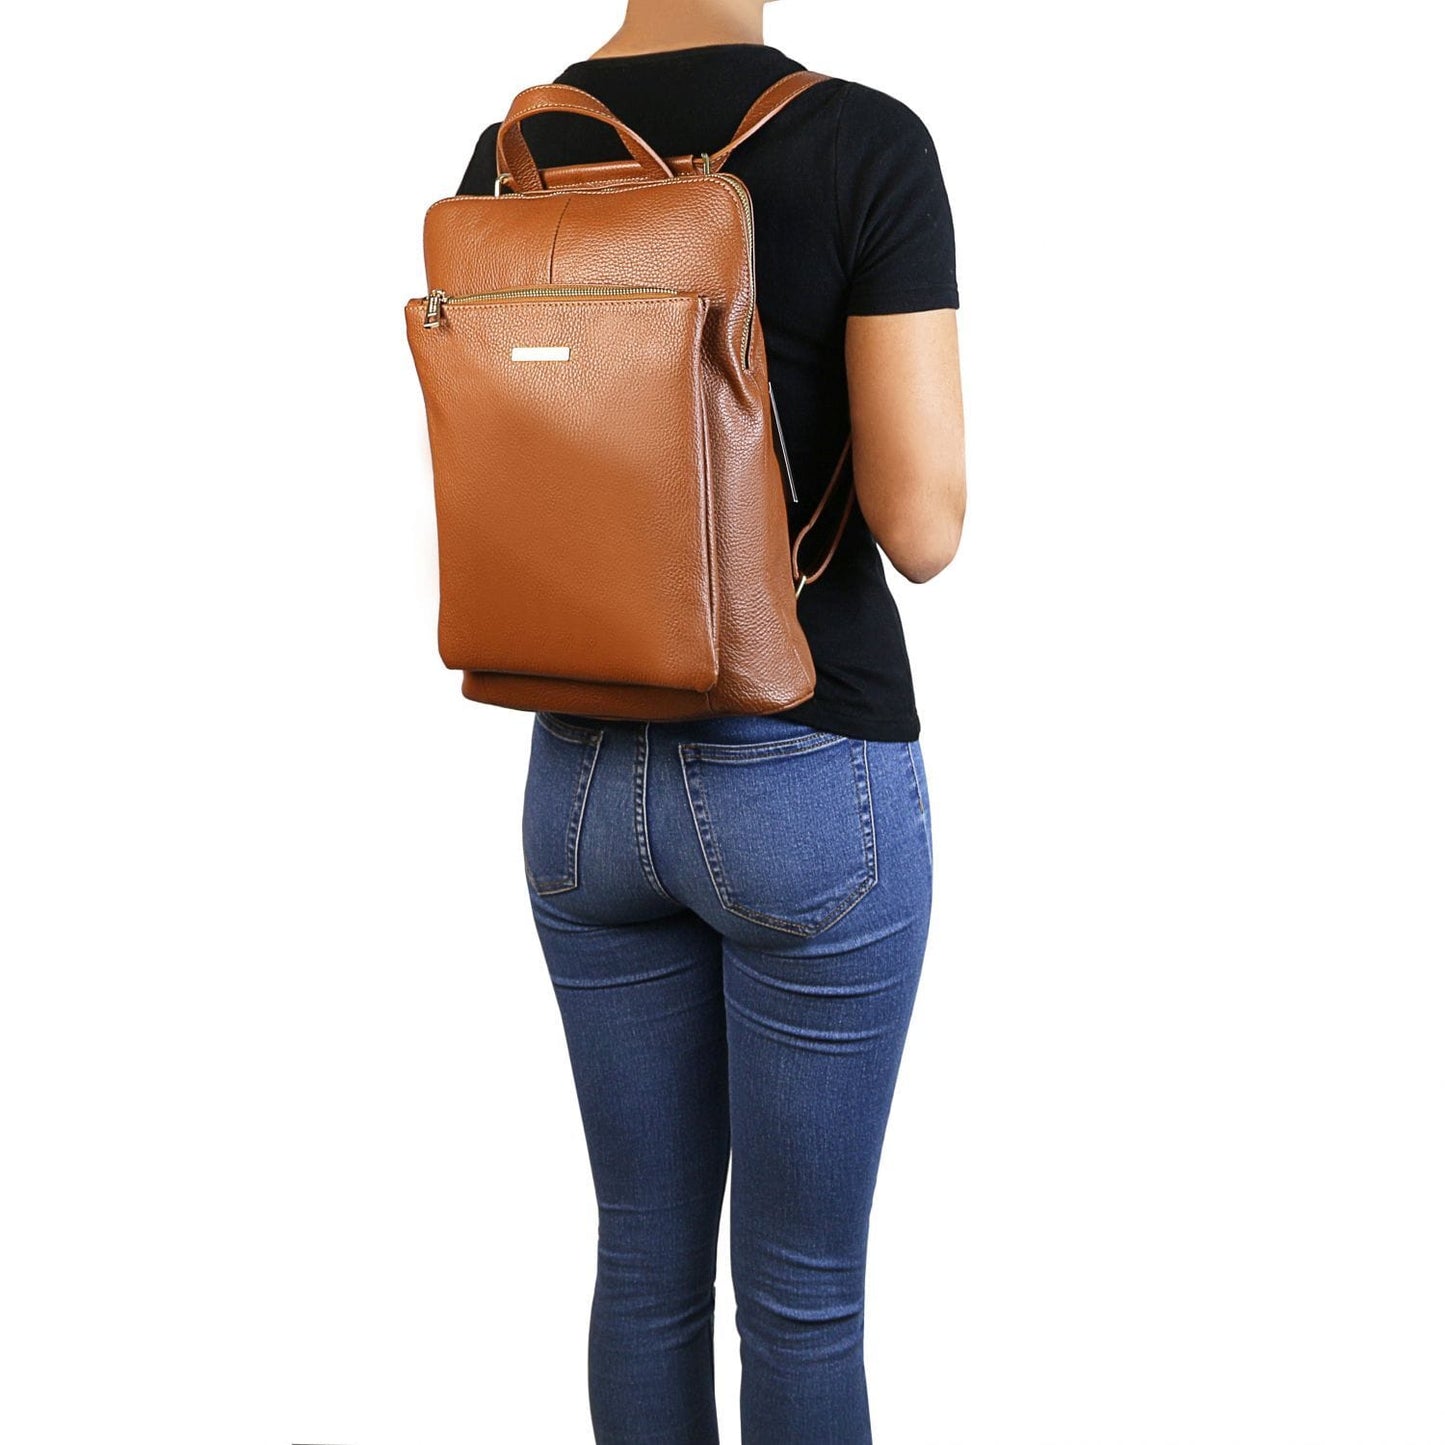 TL Bag - Soft leather backpack for women - 2-in-1 convertible backpack shoulder bag | TL141682 - Premium Leather backpacks for women - Shop now at San Rocco Italia